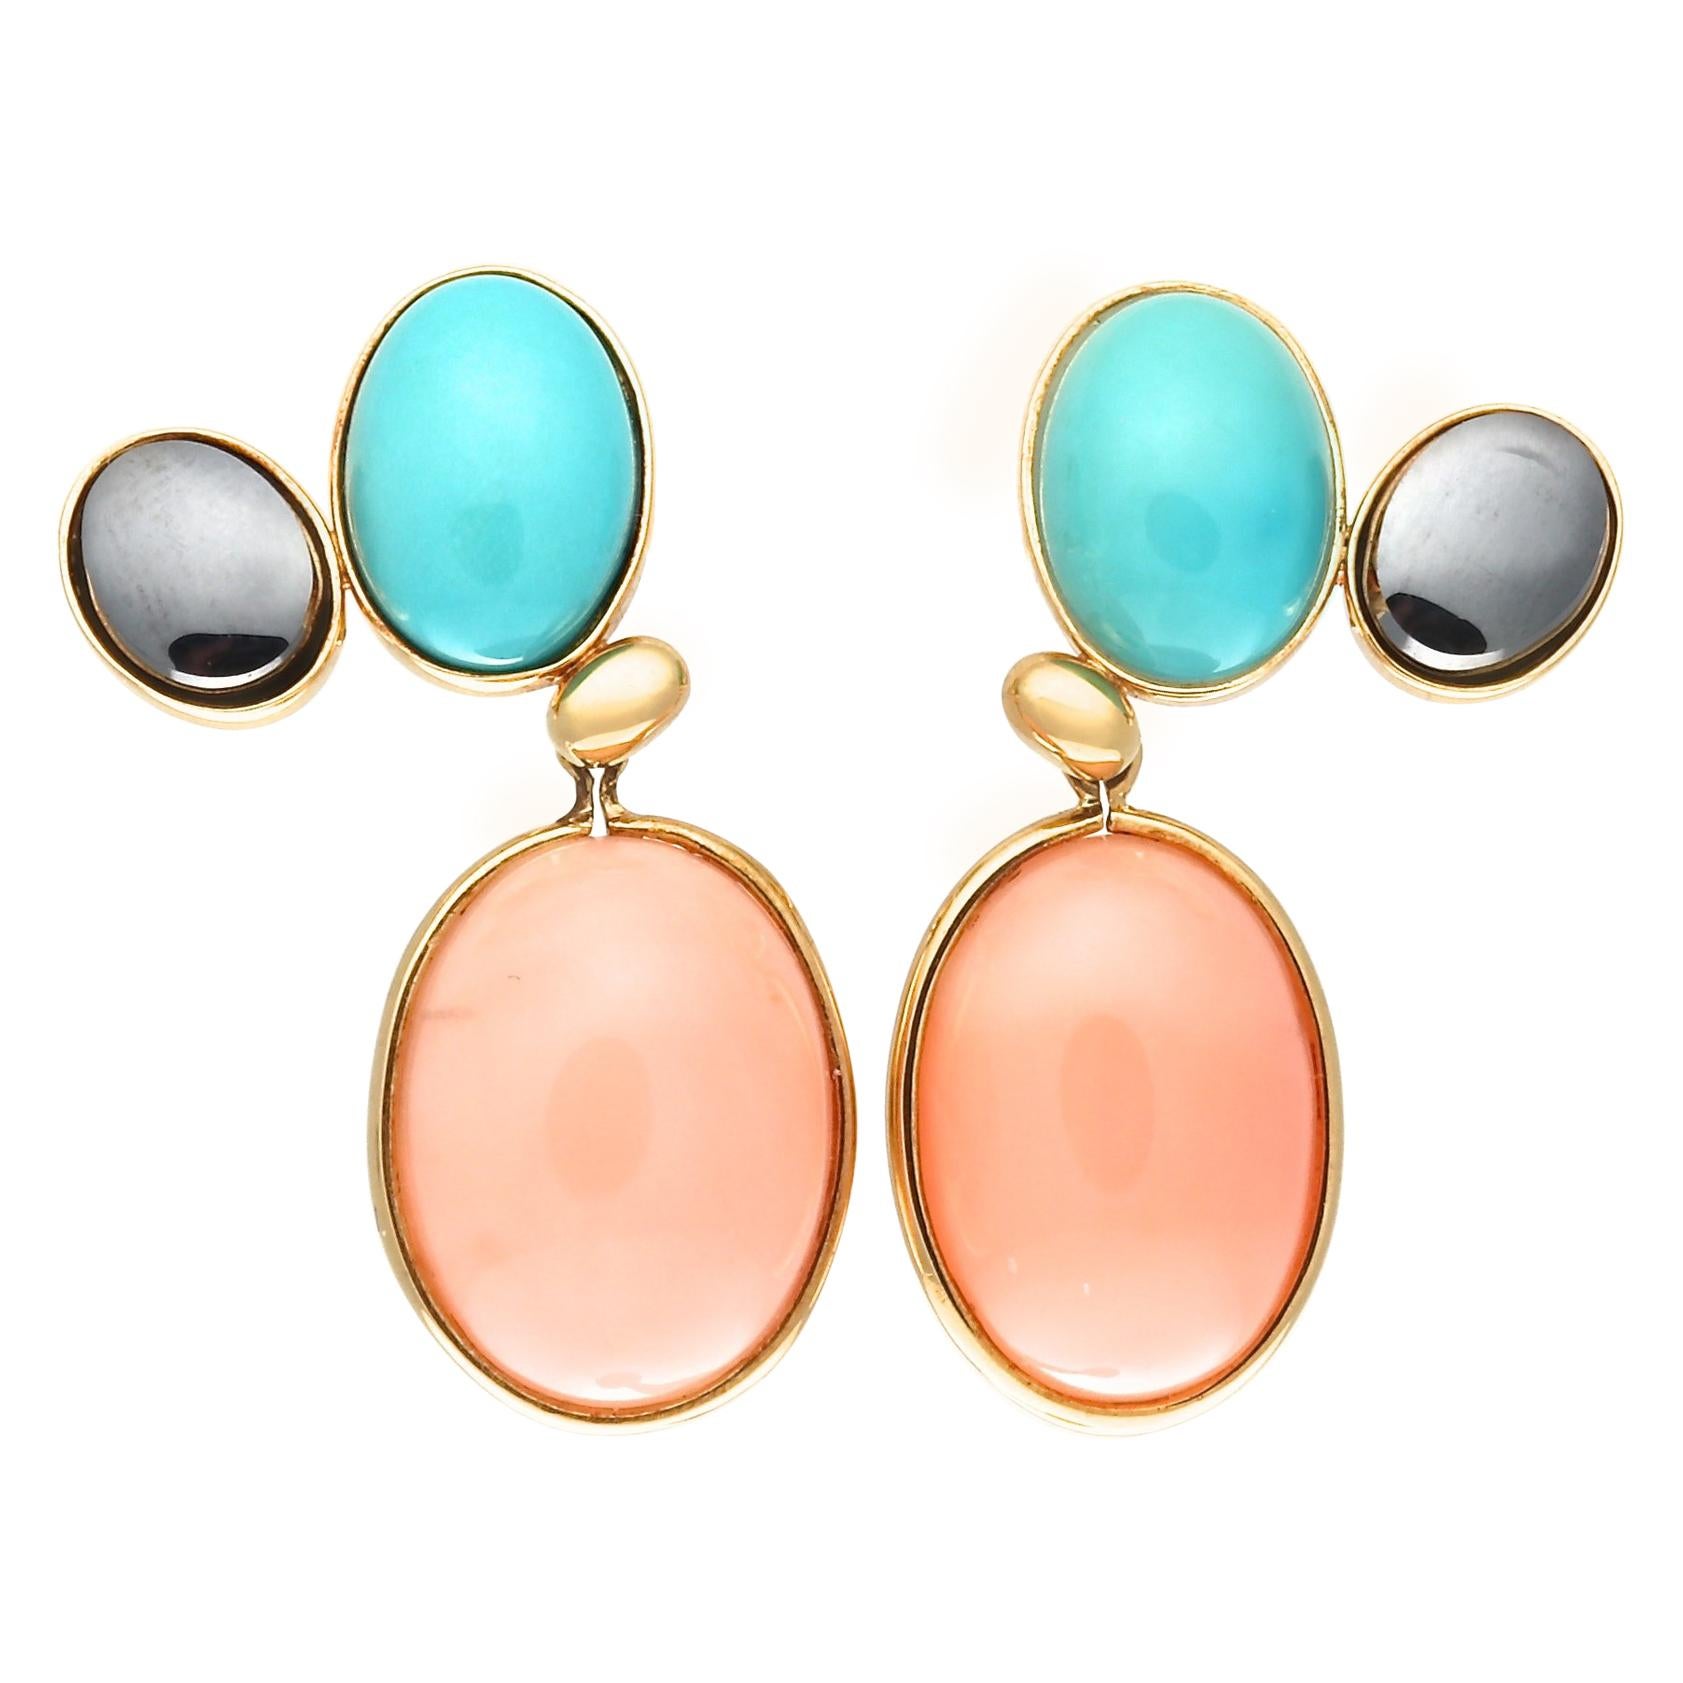 Paloma Picasso Tiffany & Co. Colorful Drop Earrings